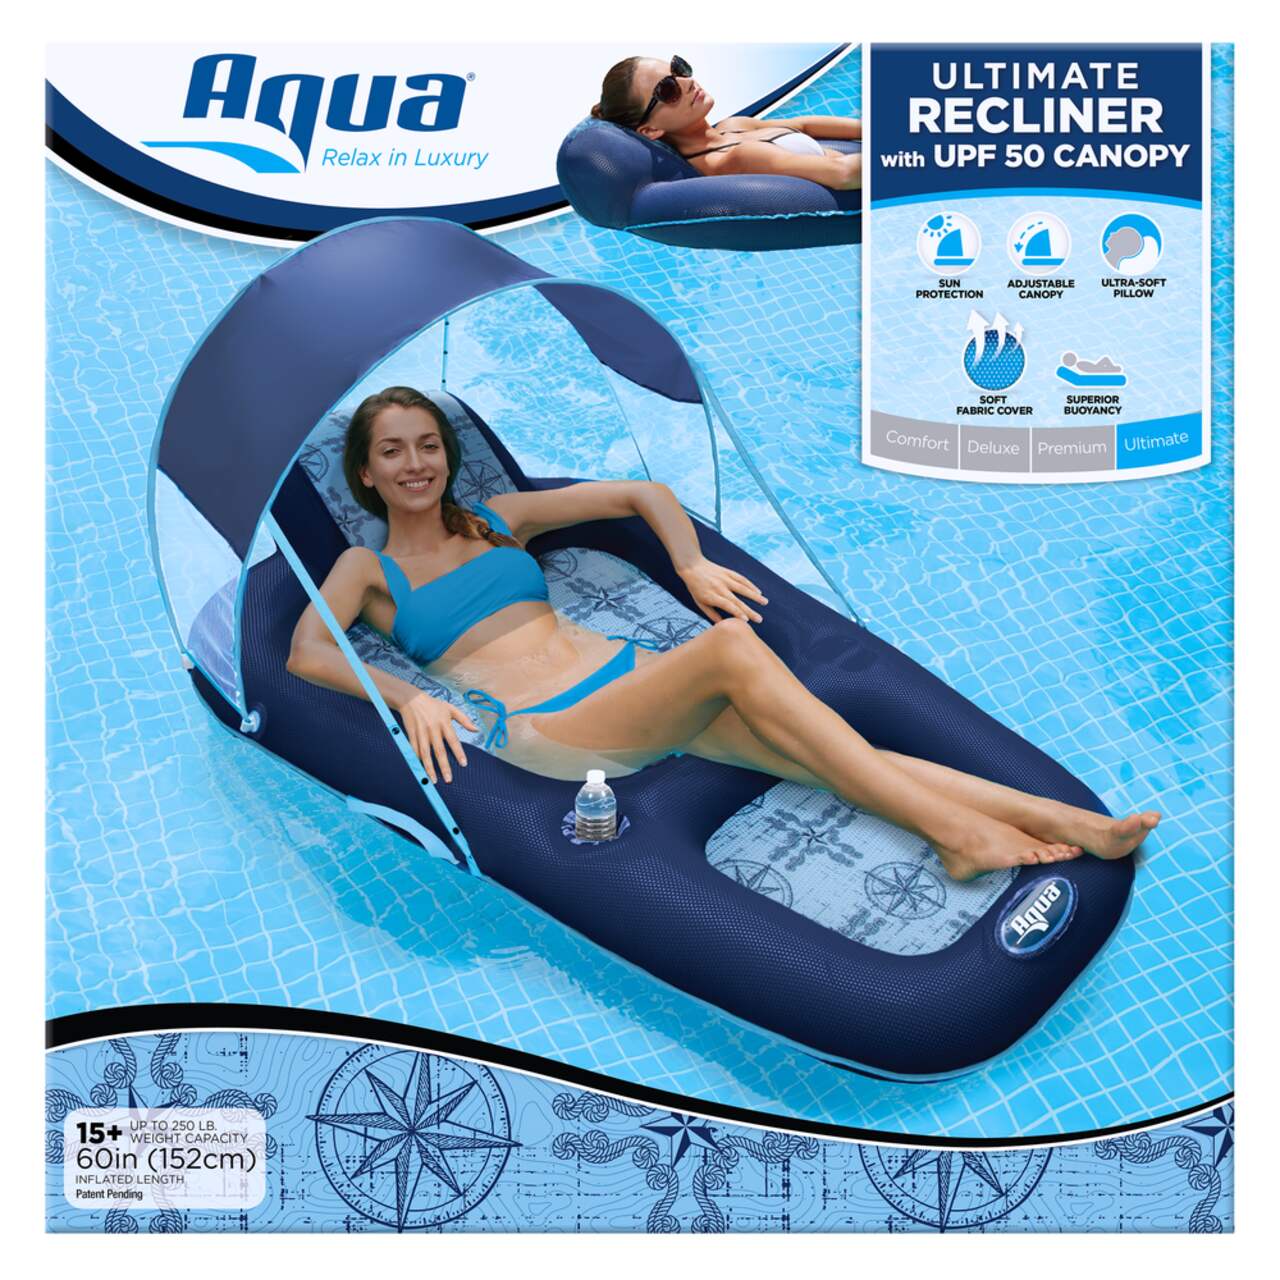 Aqua Luxury Inflatable Pool/Water Lounge with Canopy, UPF 50